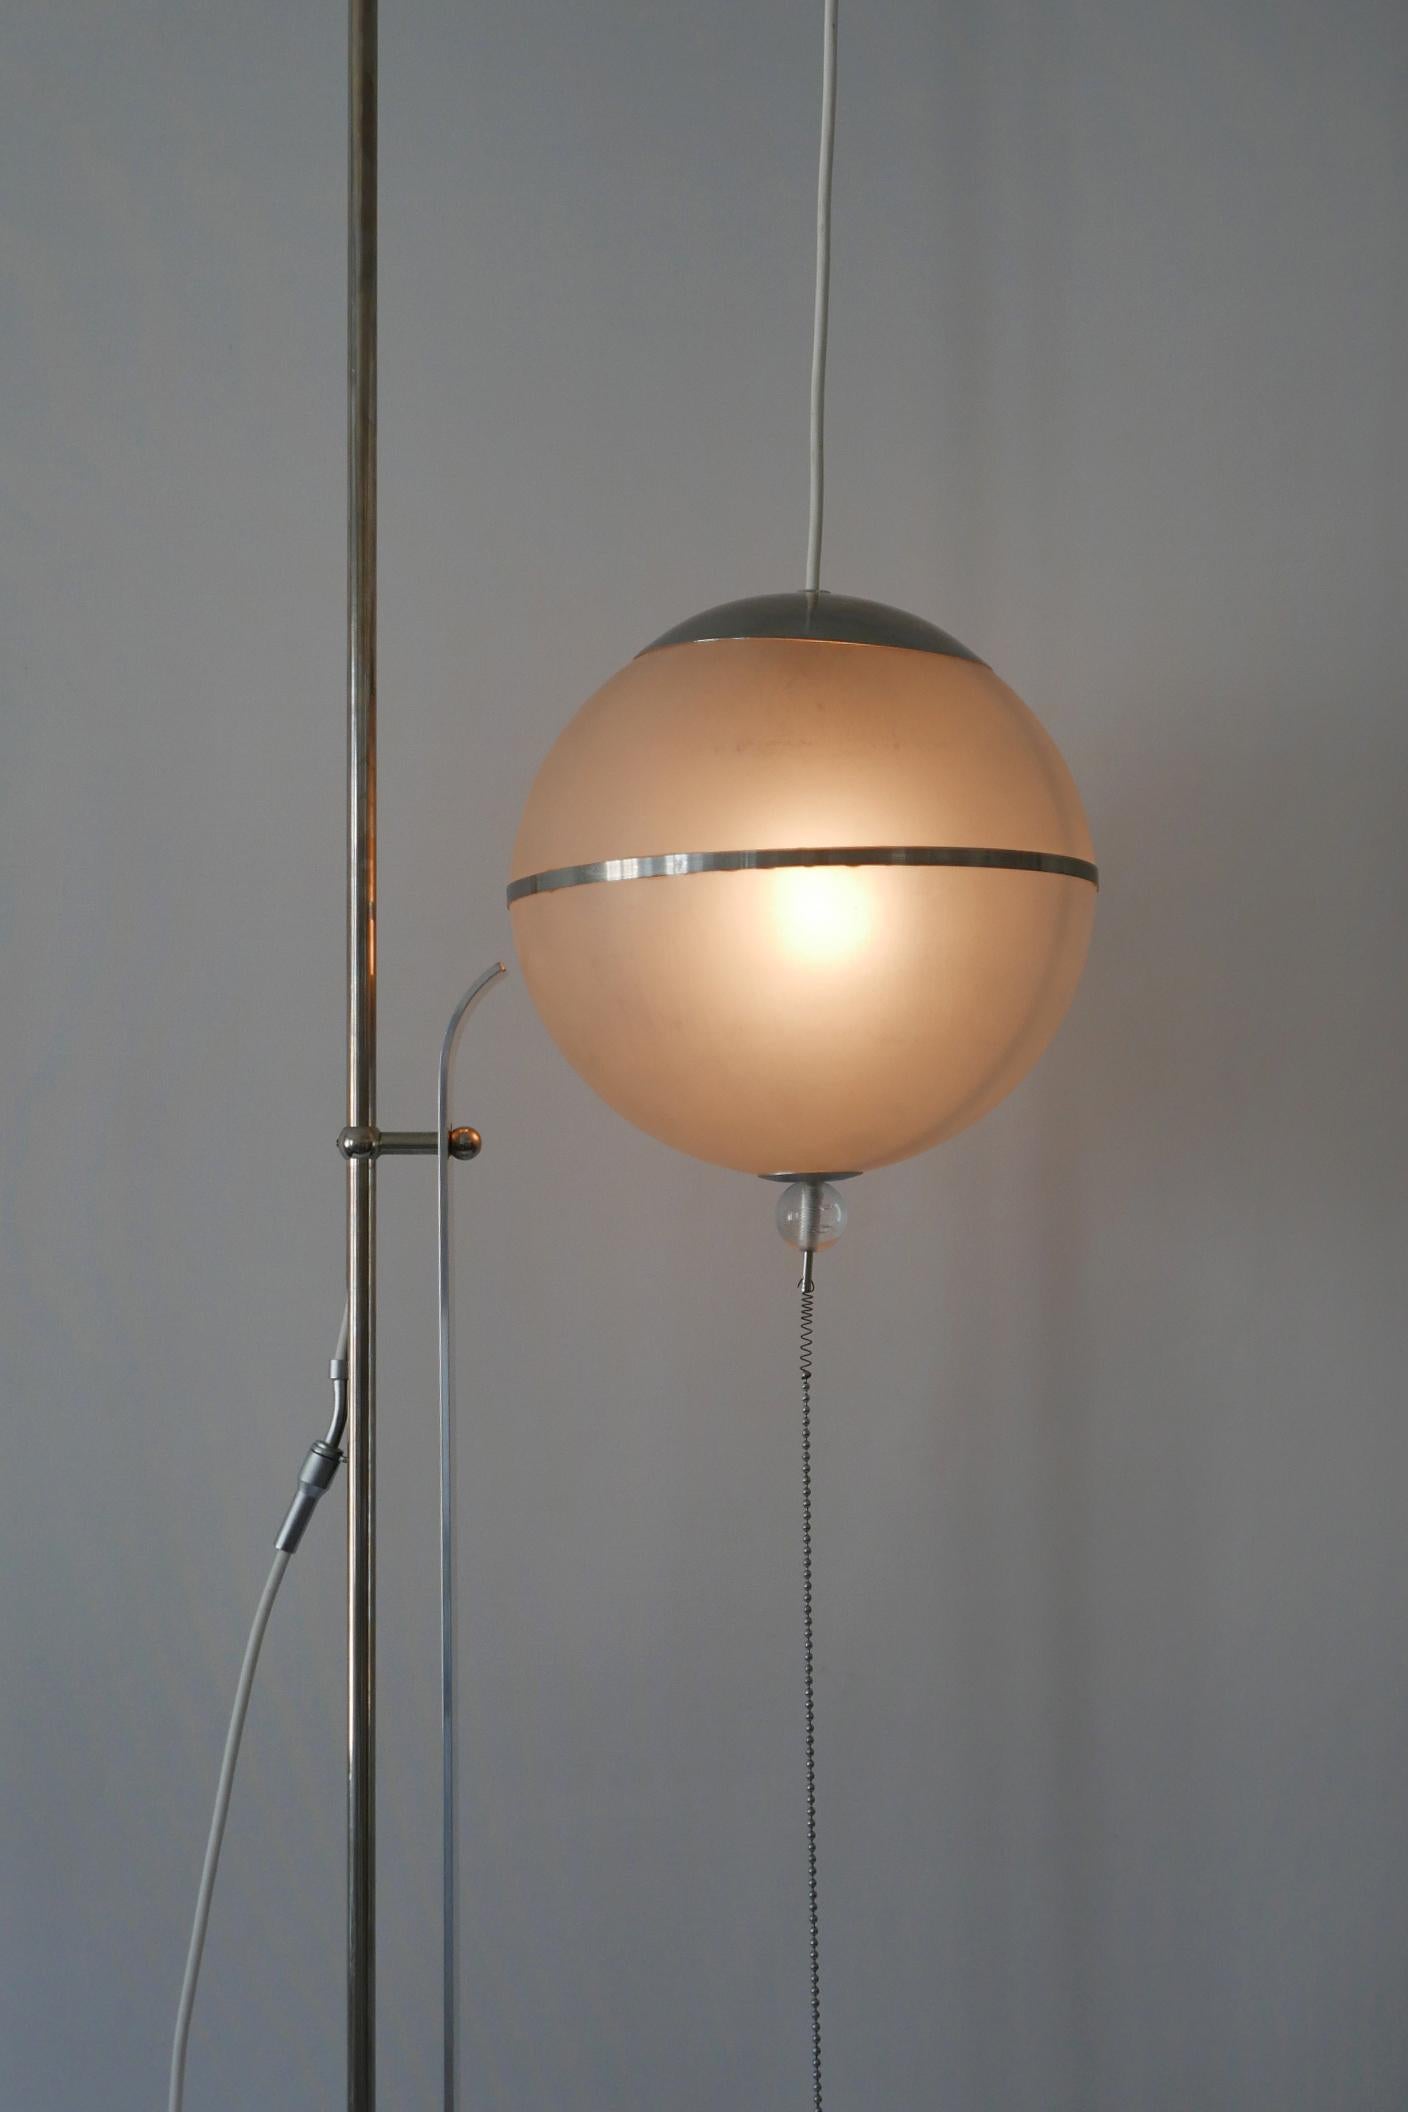 Bauhaus Floor Lamp by Karl Trabert for Schanzenbach & Co 1930s Germany For Sale 8